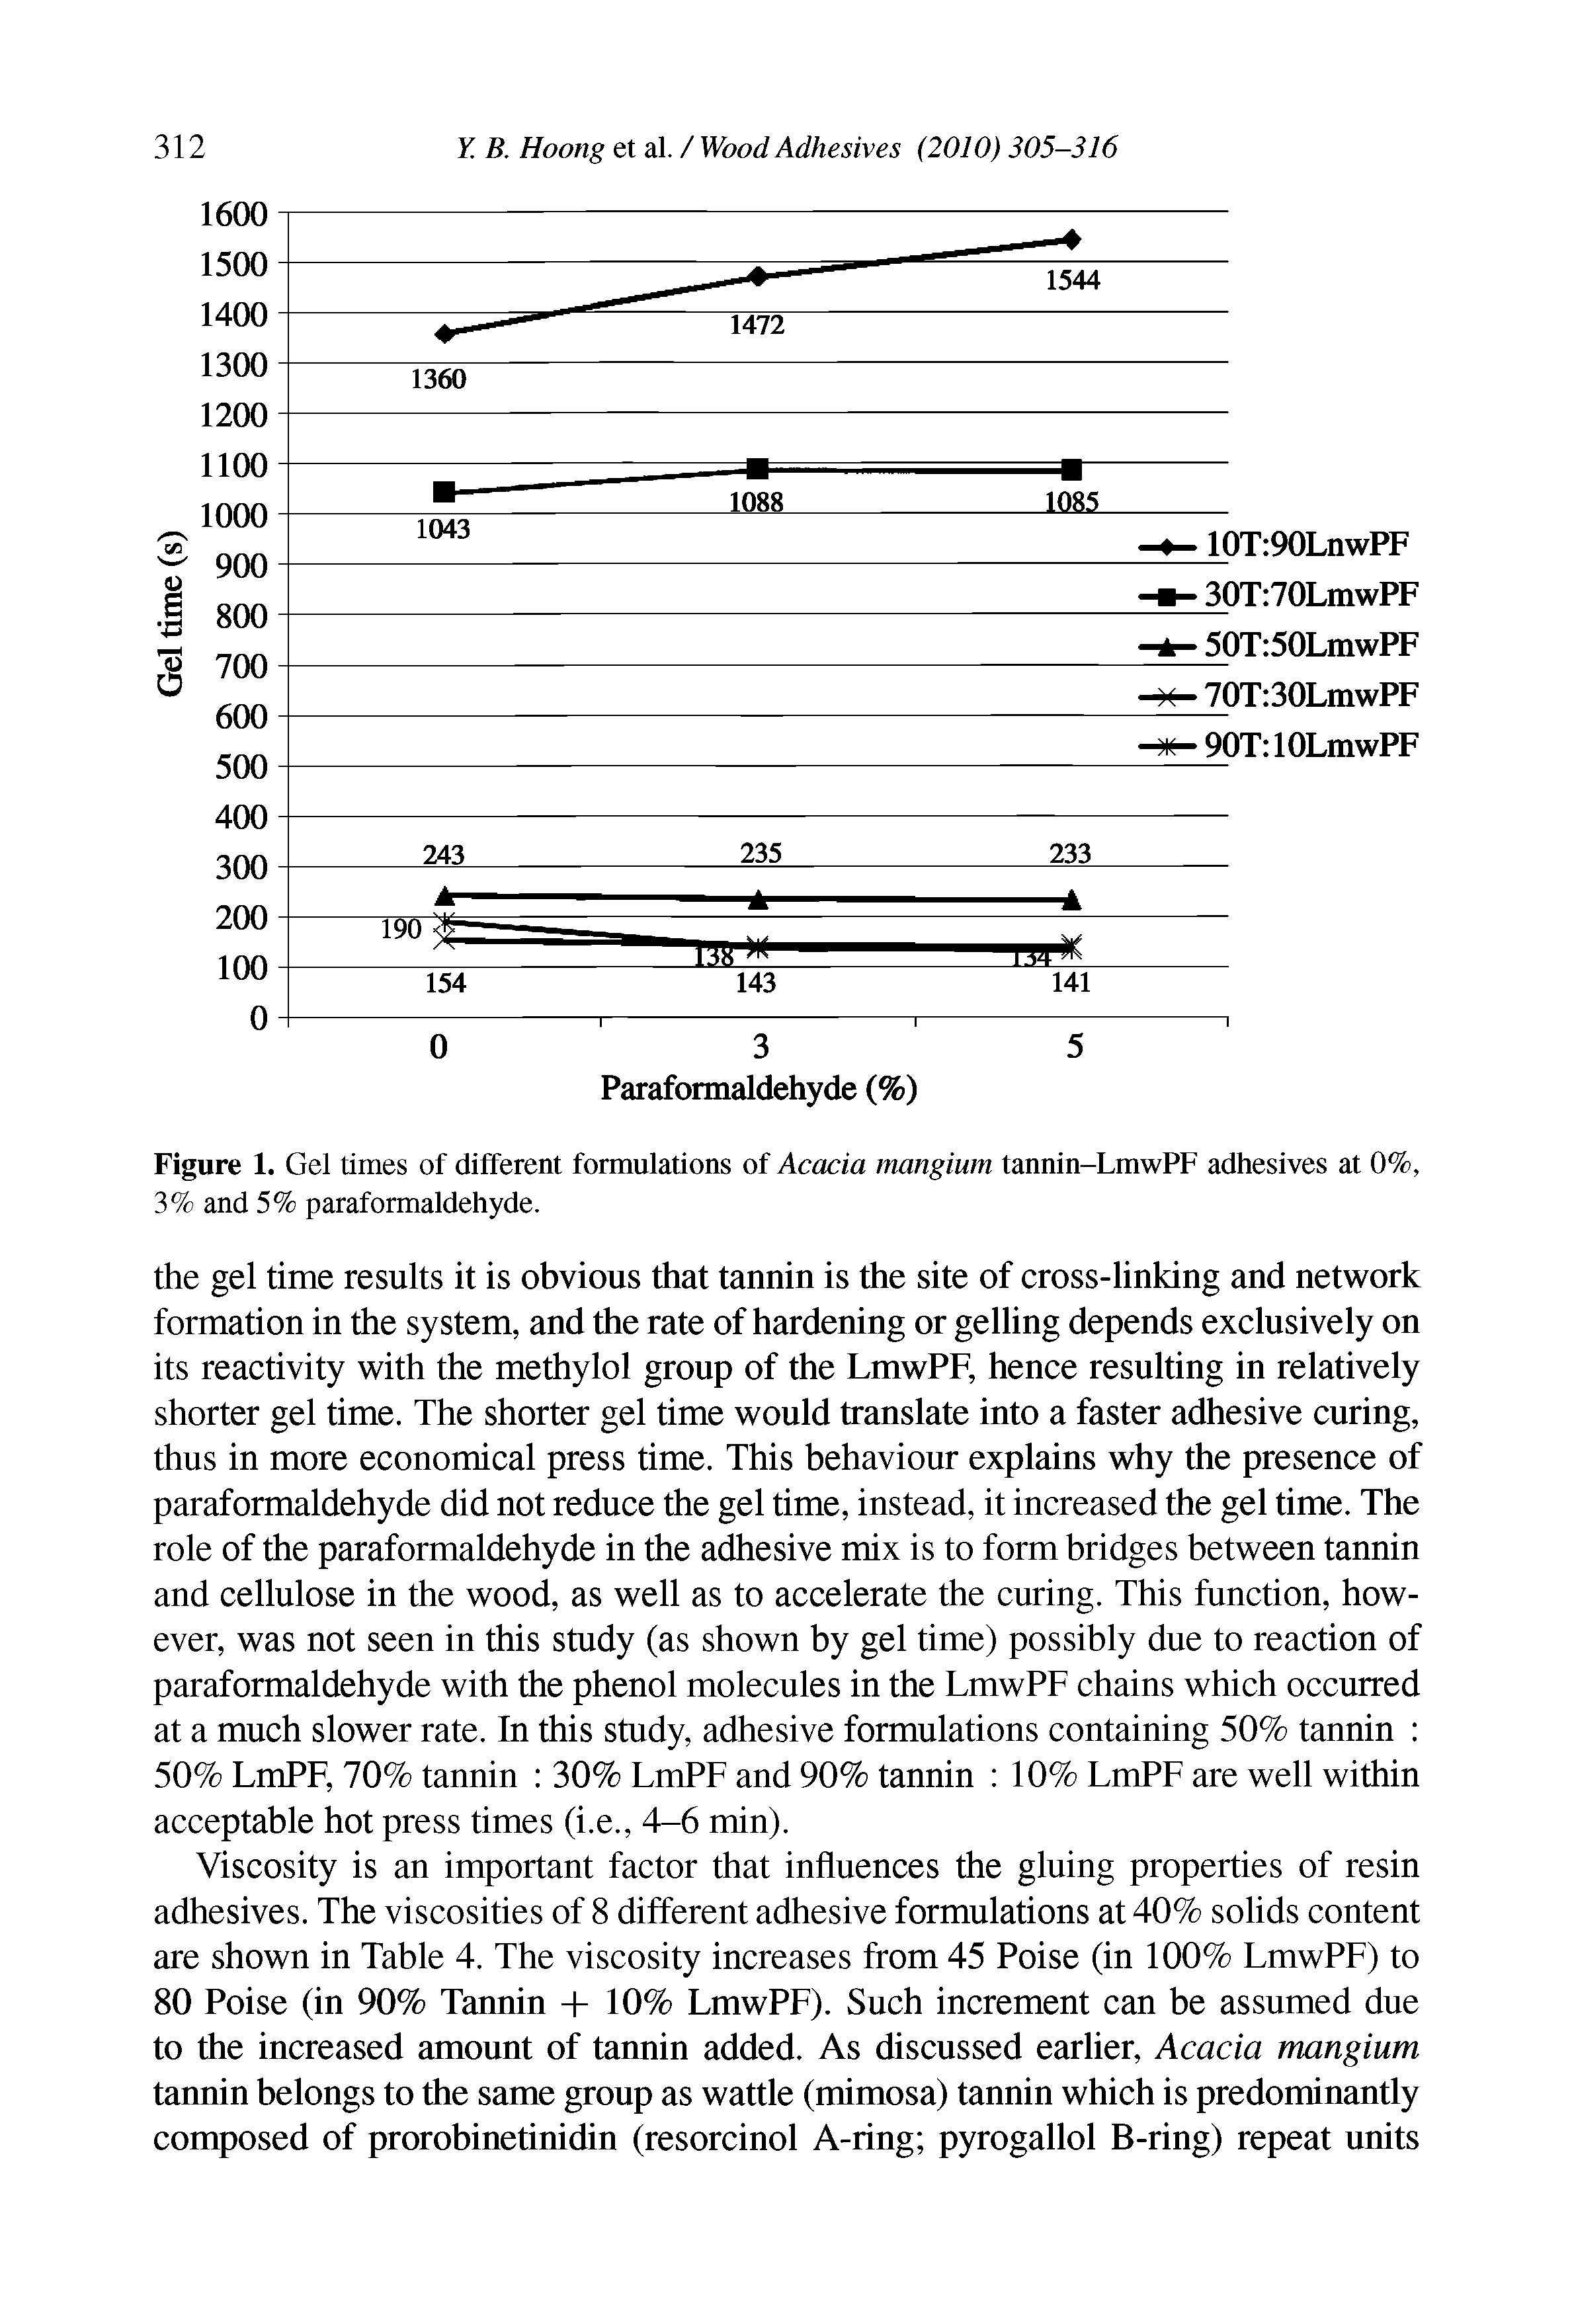 Figure 1. Gel times of different formulations of Acacia mangium tannin-LmwPF adhesives at 0%, 3% and 5% paraformaldehyde.